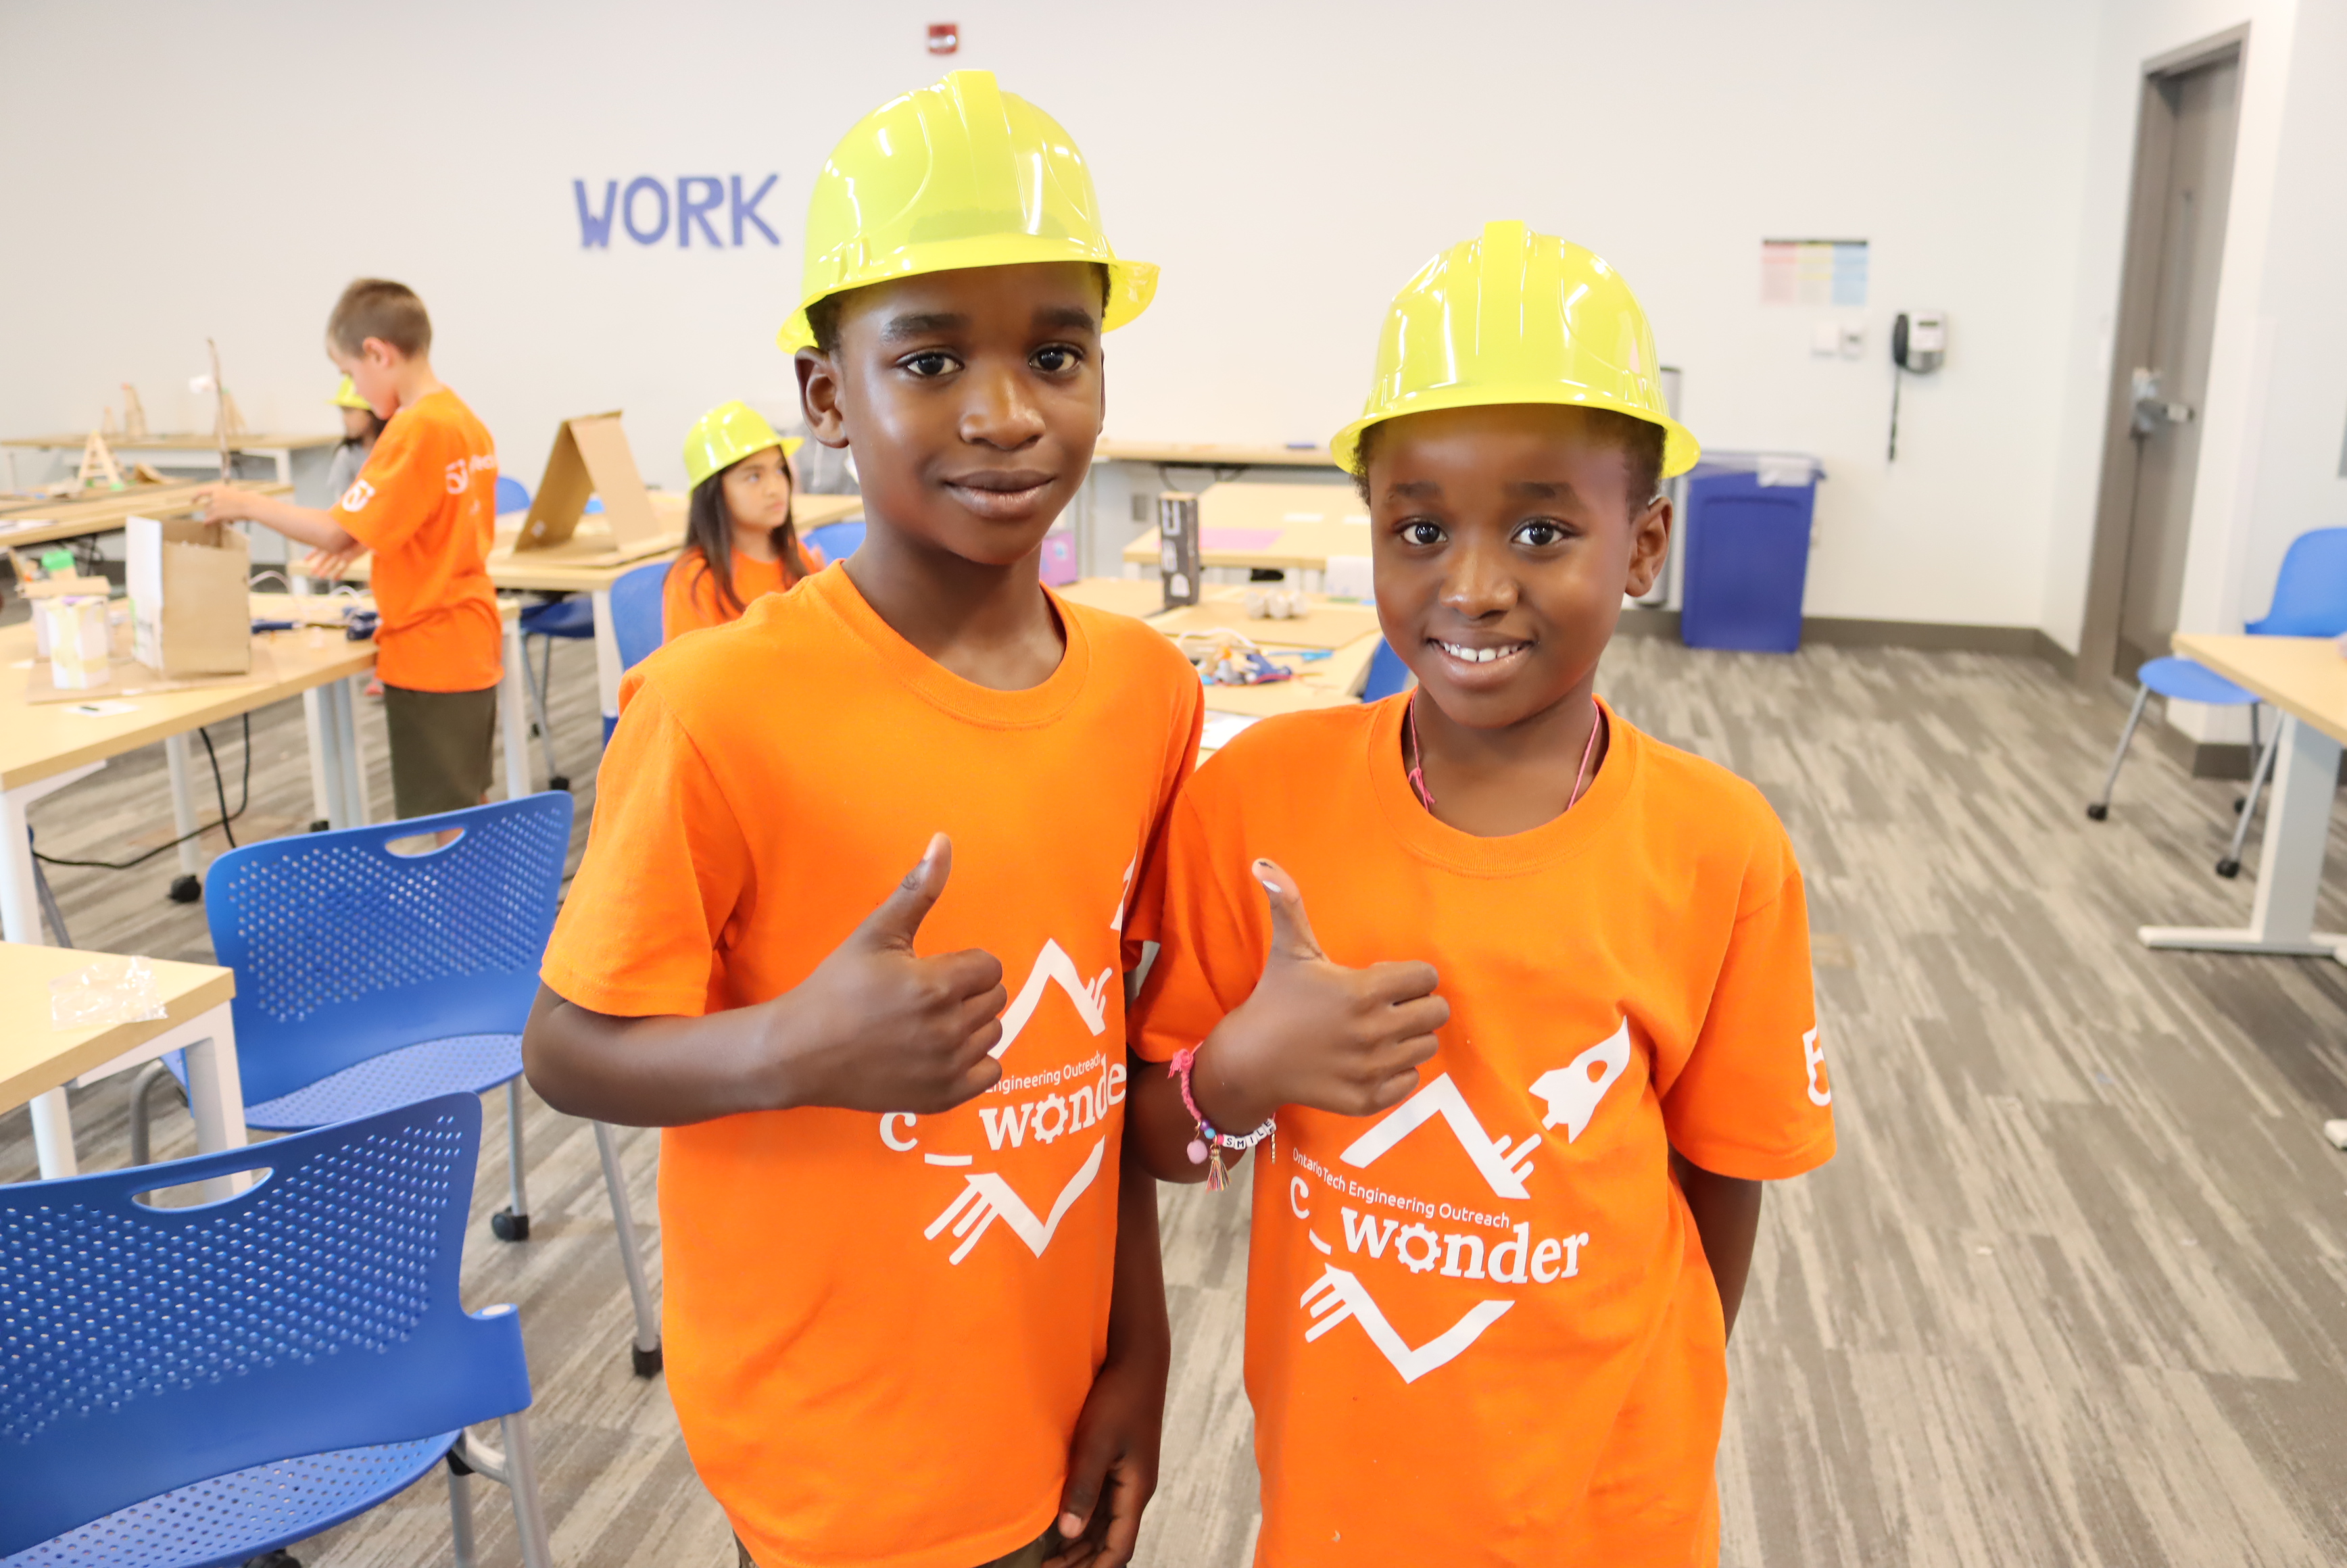 Two youth wearing construction hats and orange shirts, smiling at the camera and giving the thumbs up